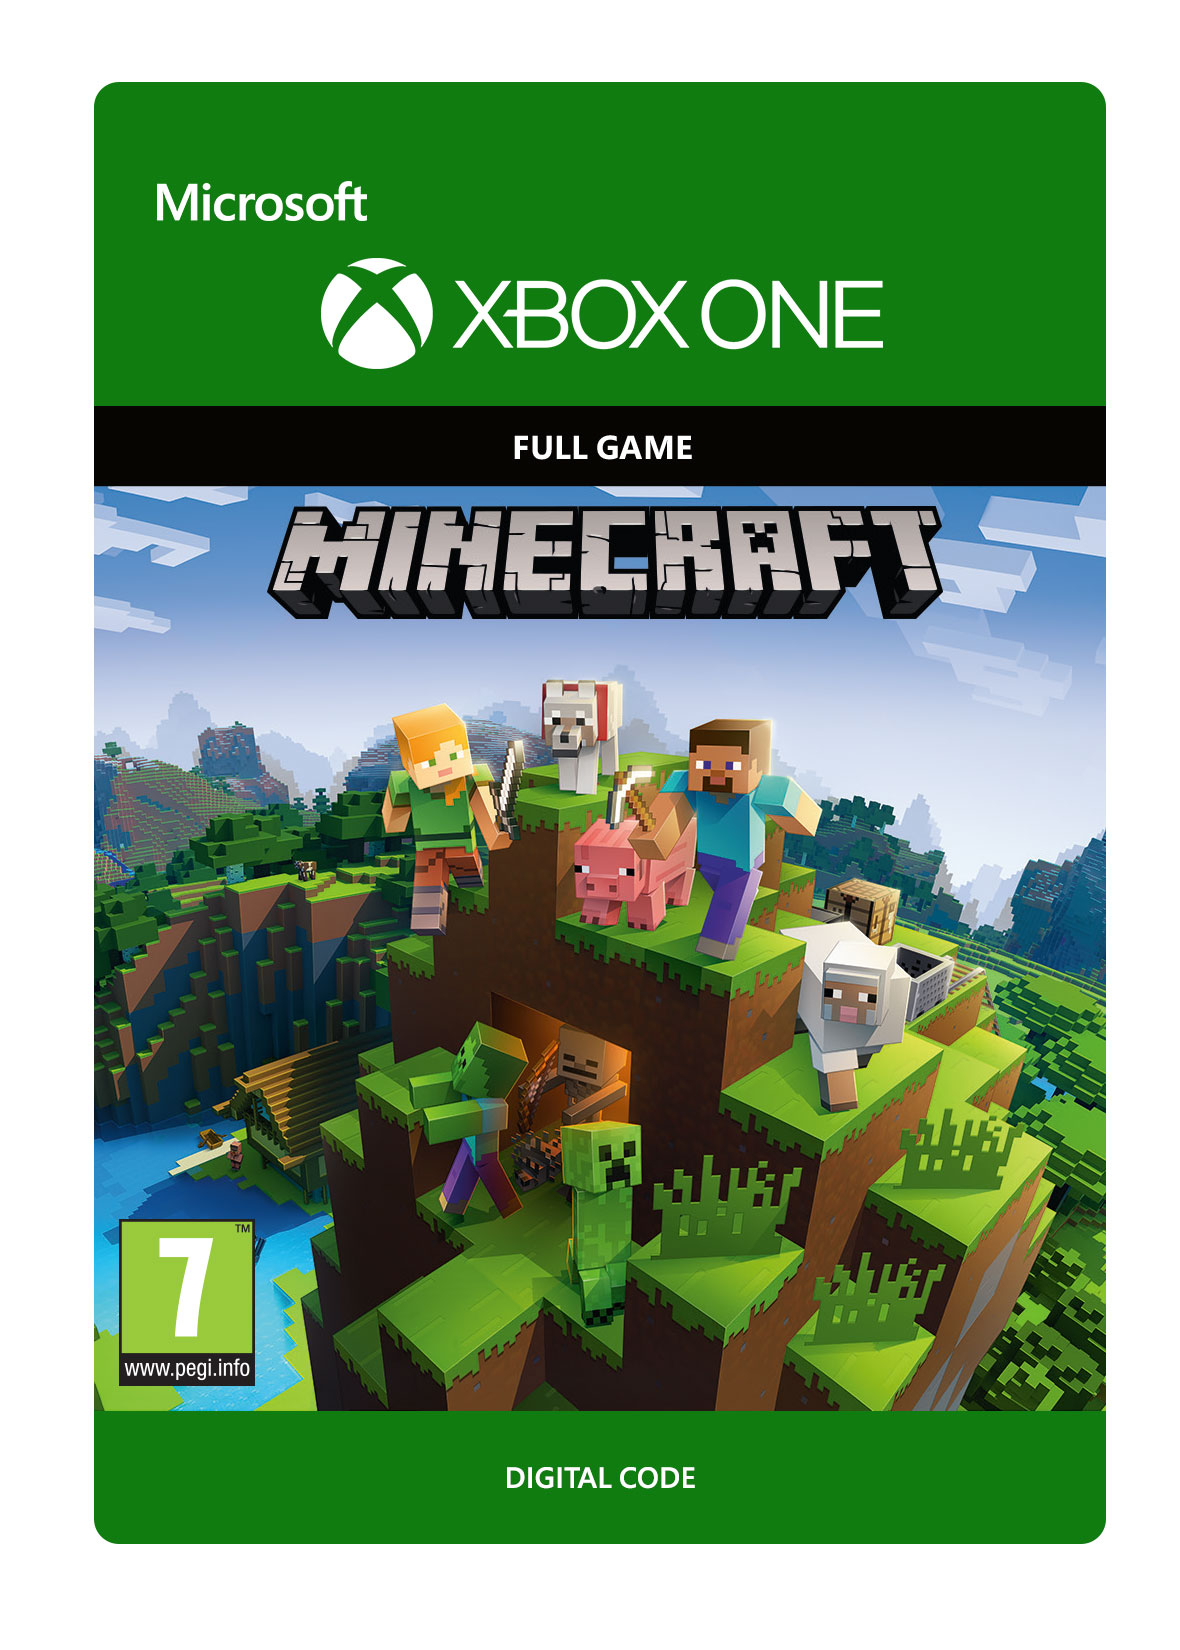 Minecraft: Full Game - Xbox One - 15th Anniversary Sale